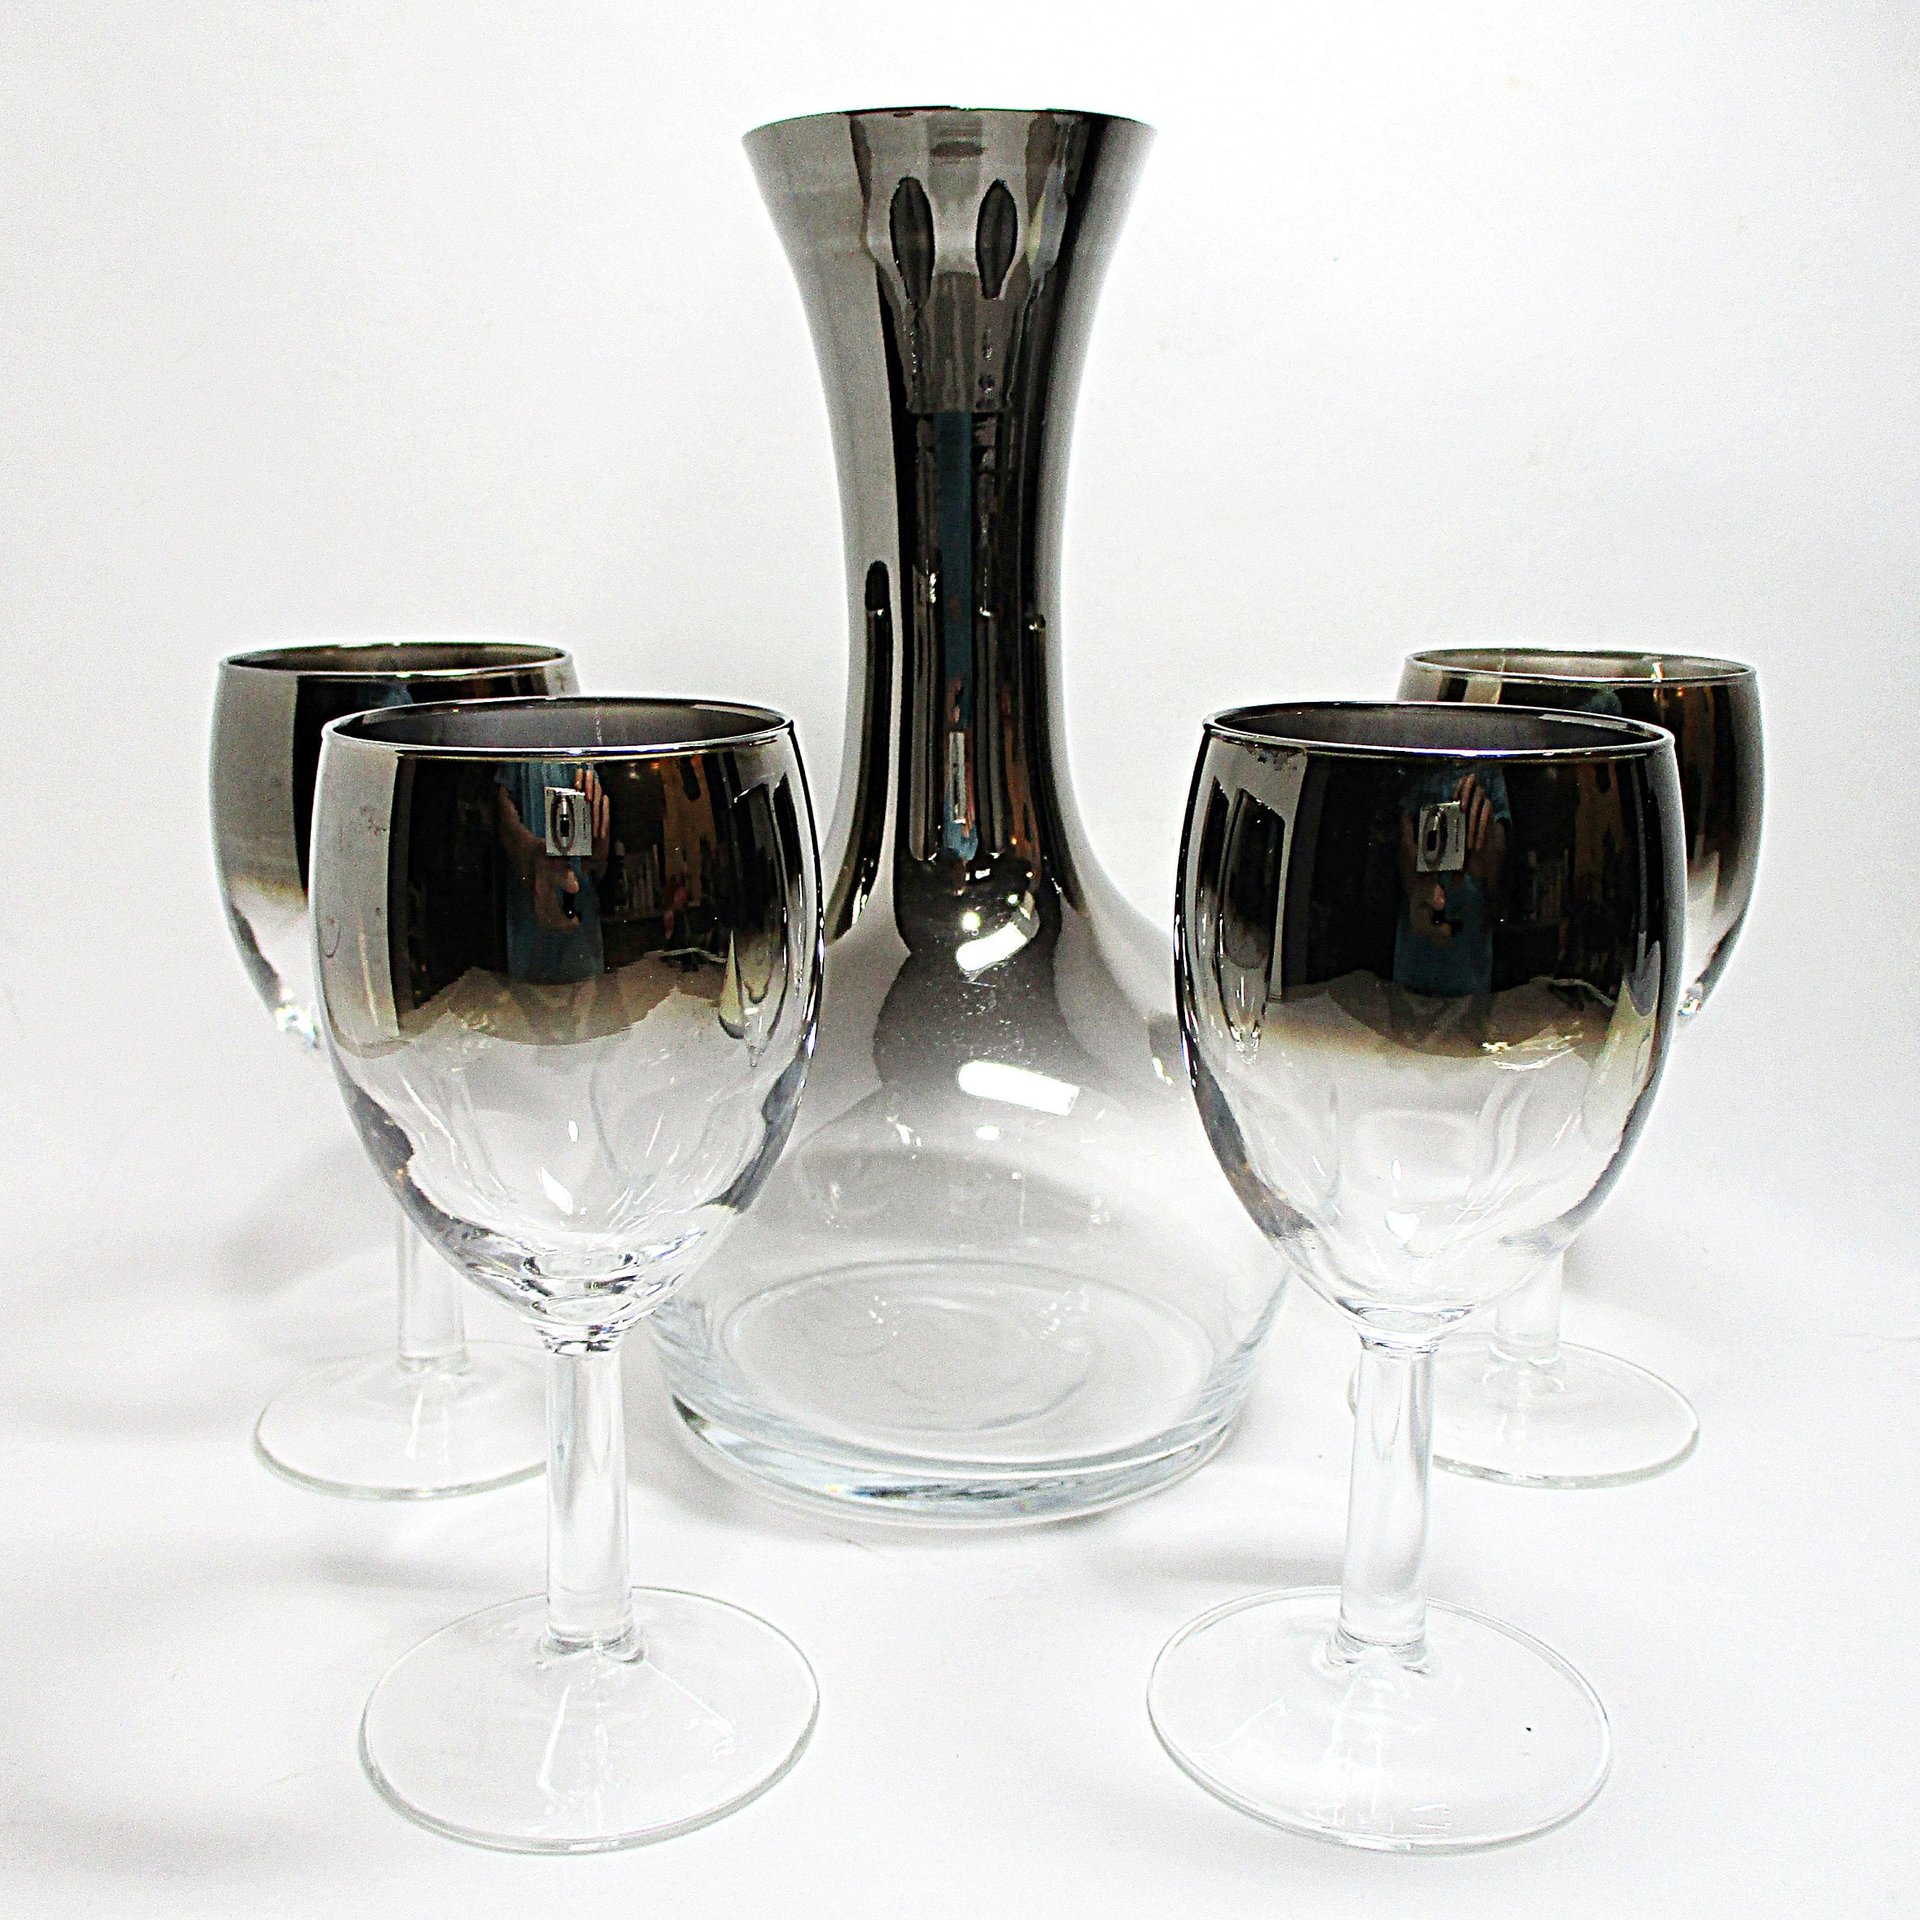 Vintage Wine Carafe and 4 Glasses, Silver Fade Decanter, Mid Century Barware, Silver Ombre, Wedding Gift